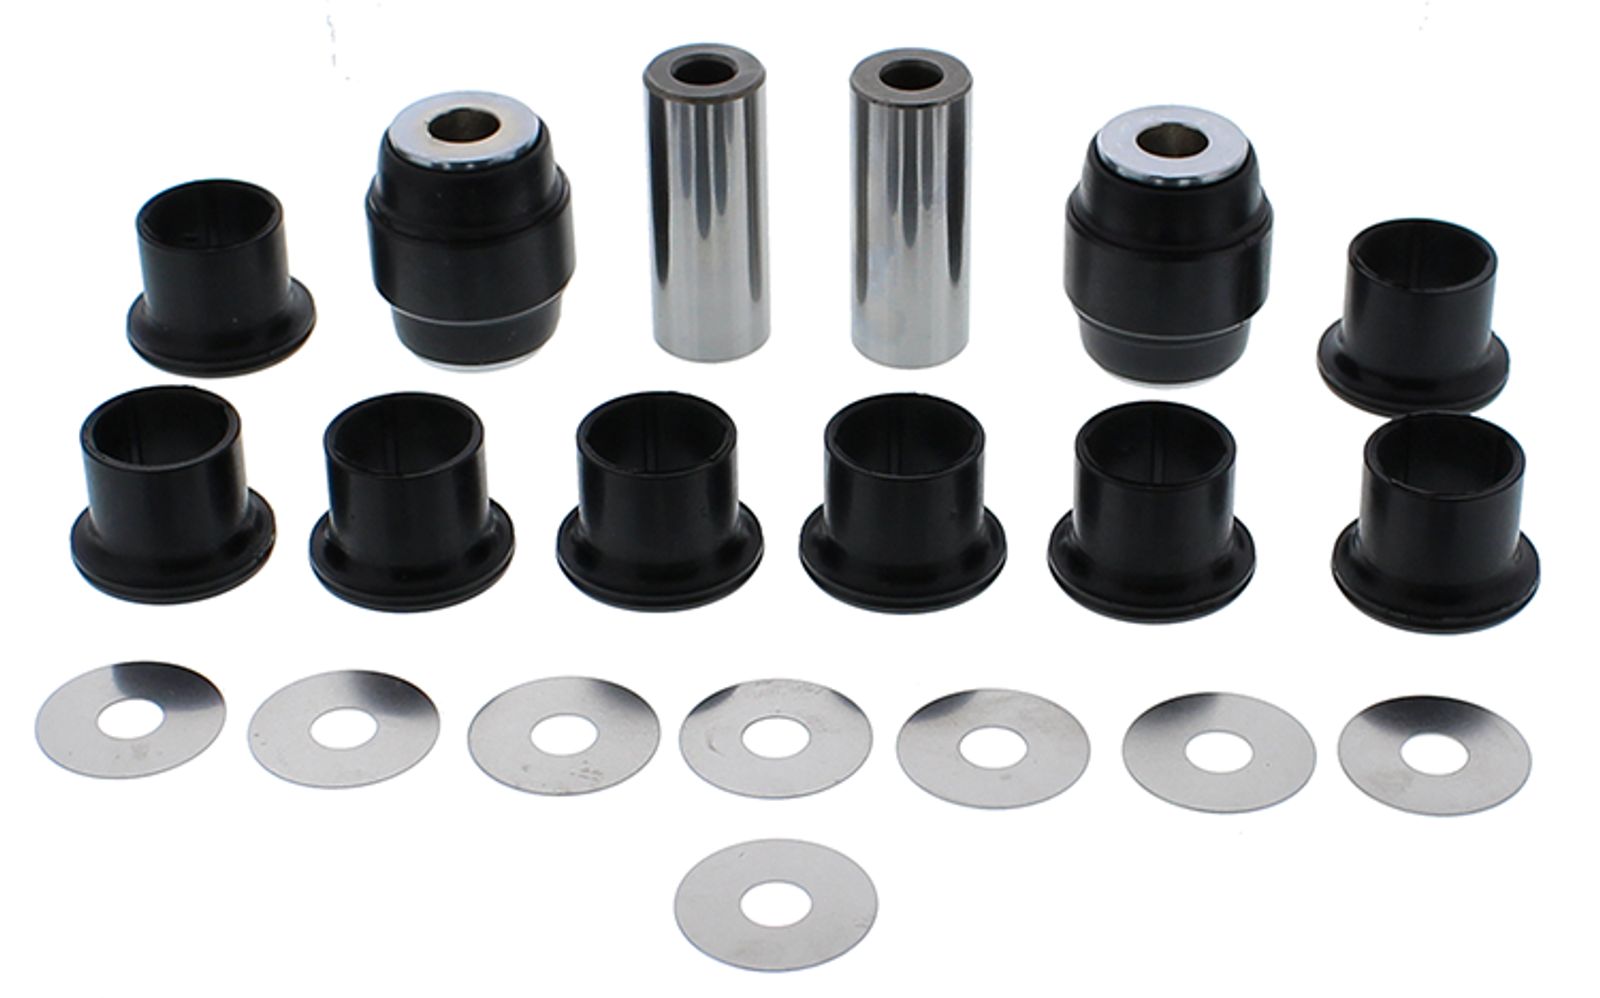 Wrp Rear Ind. Suspension Kits - WRP501171 image